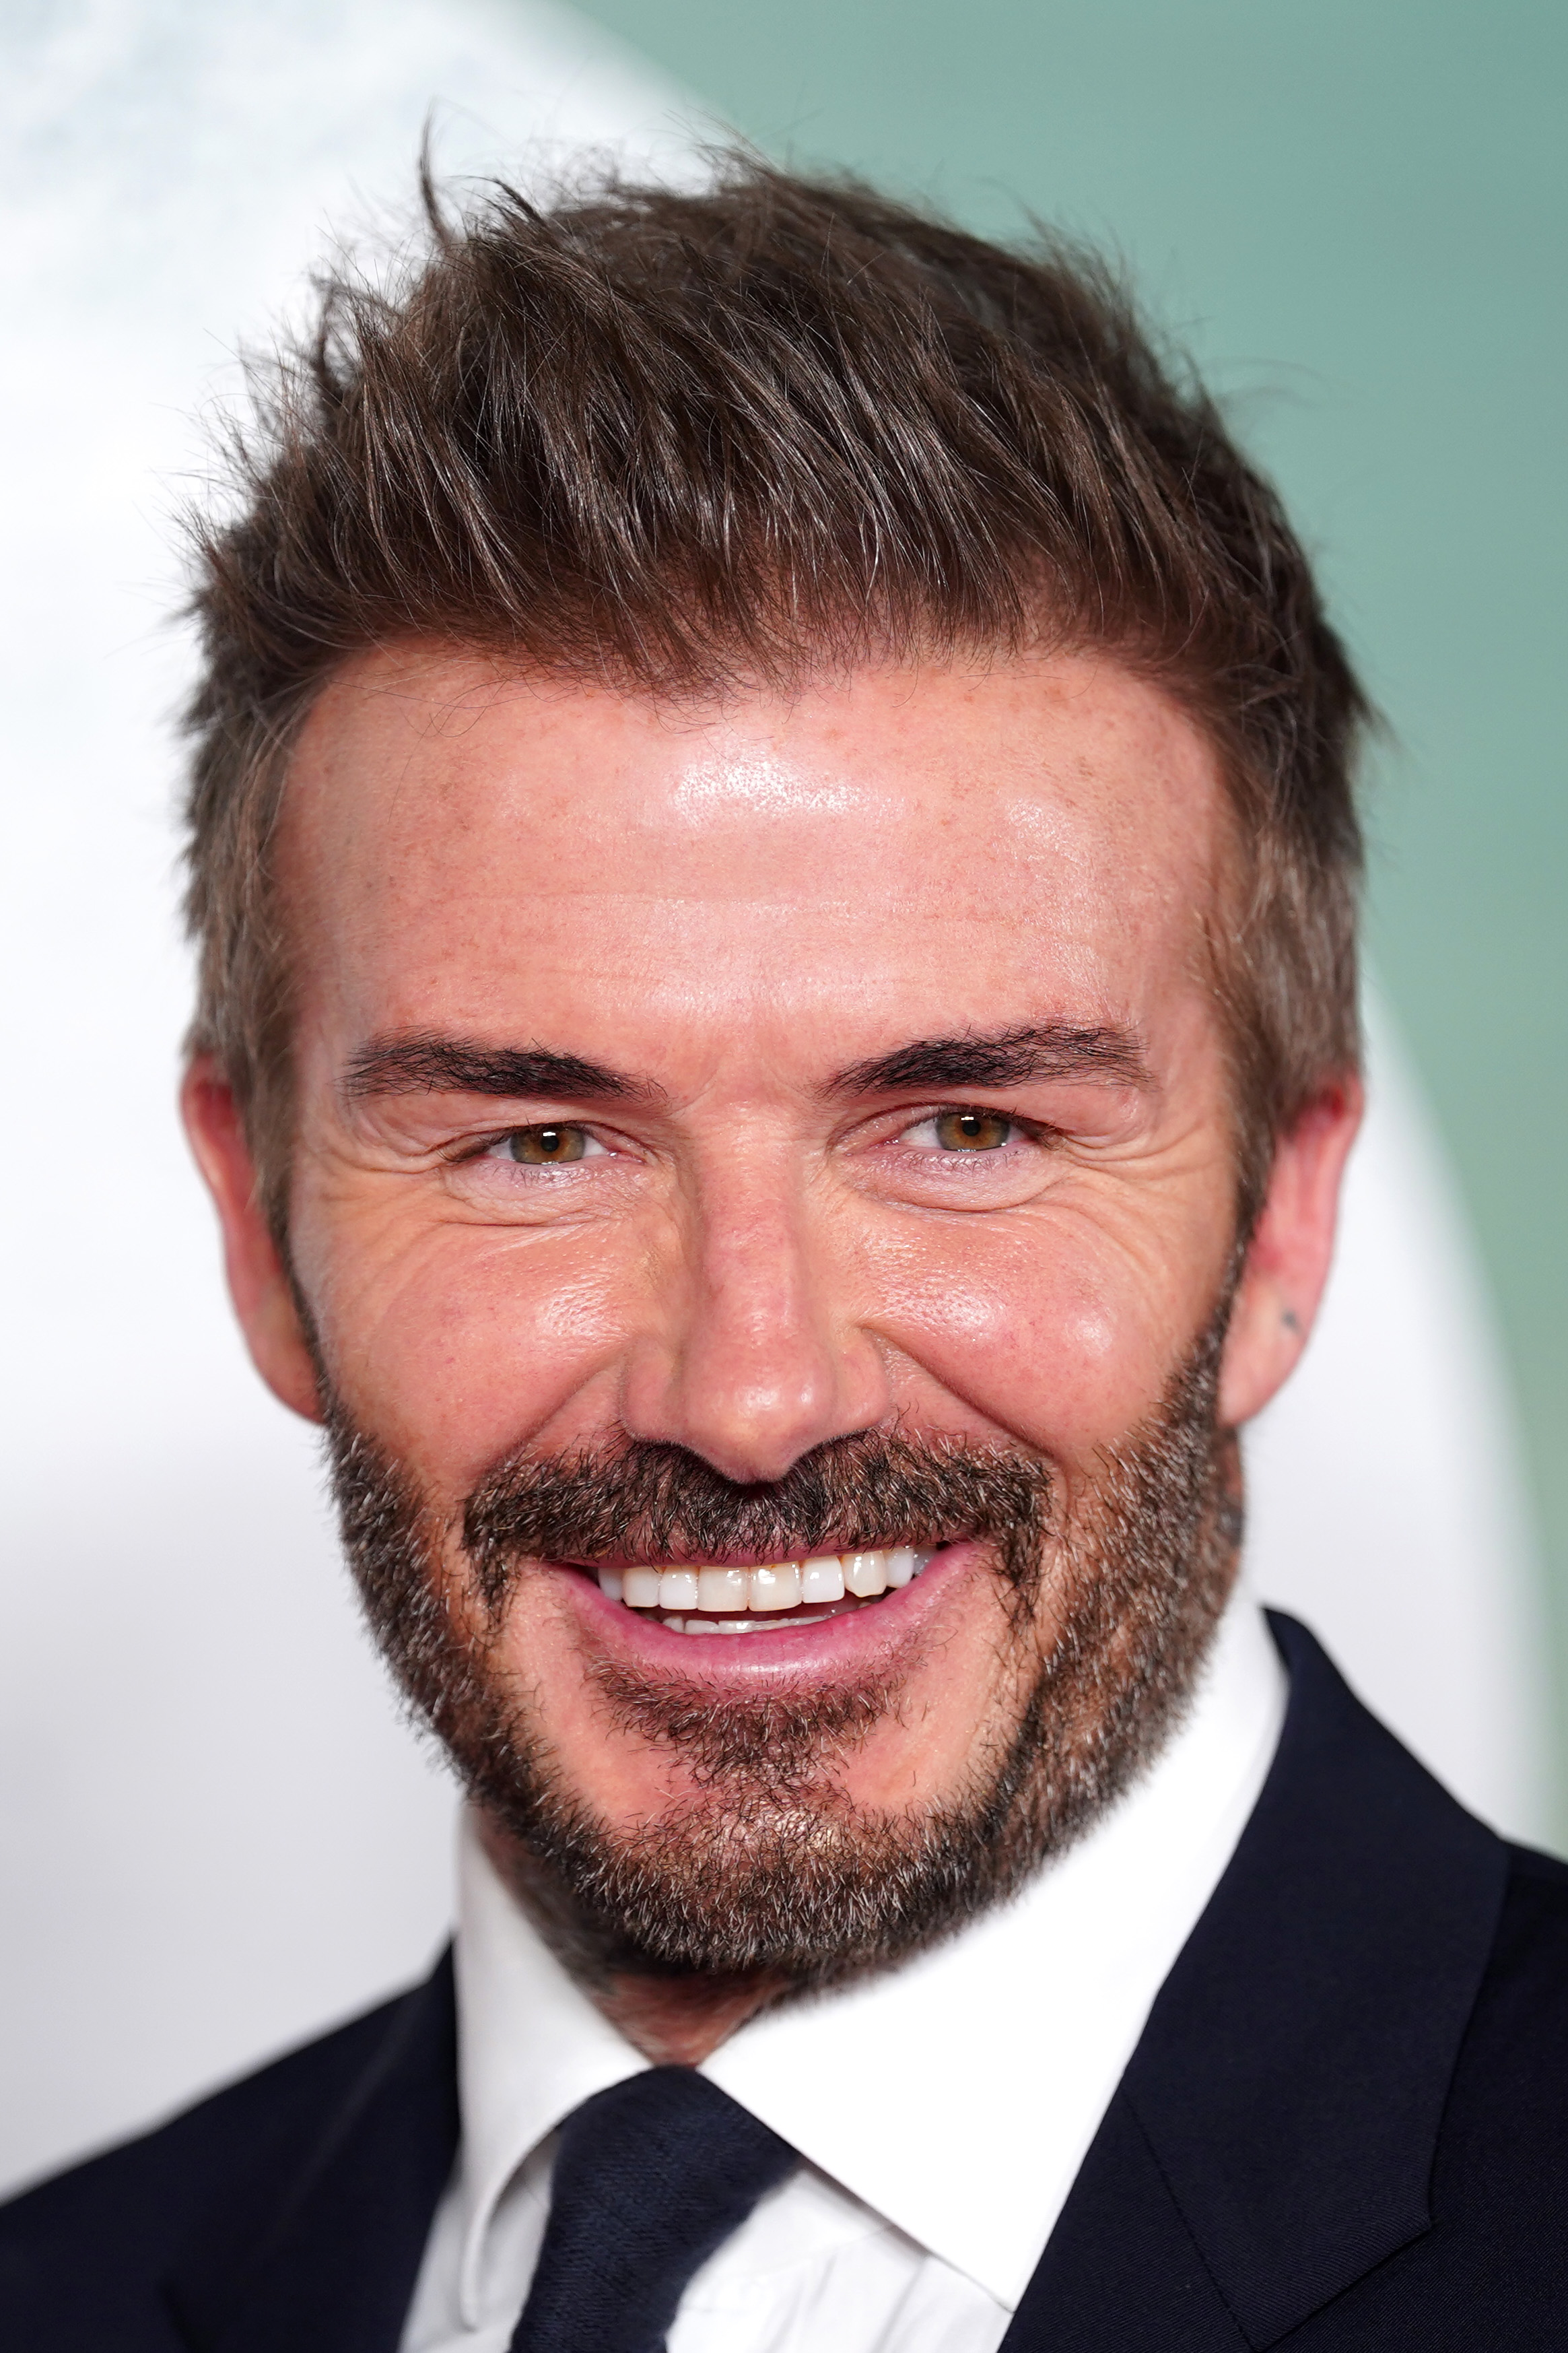 David Beckham at the "99" world premiere on May 9, 2024, in Manchester, England. | Source: Getty Images